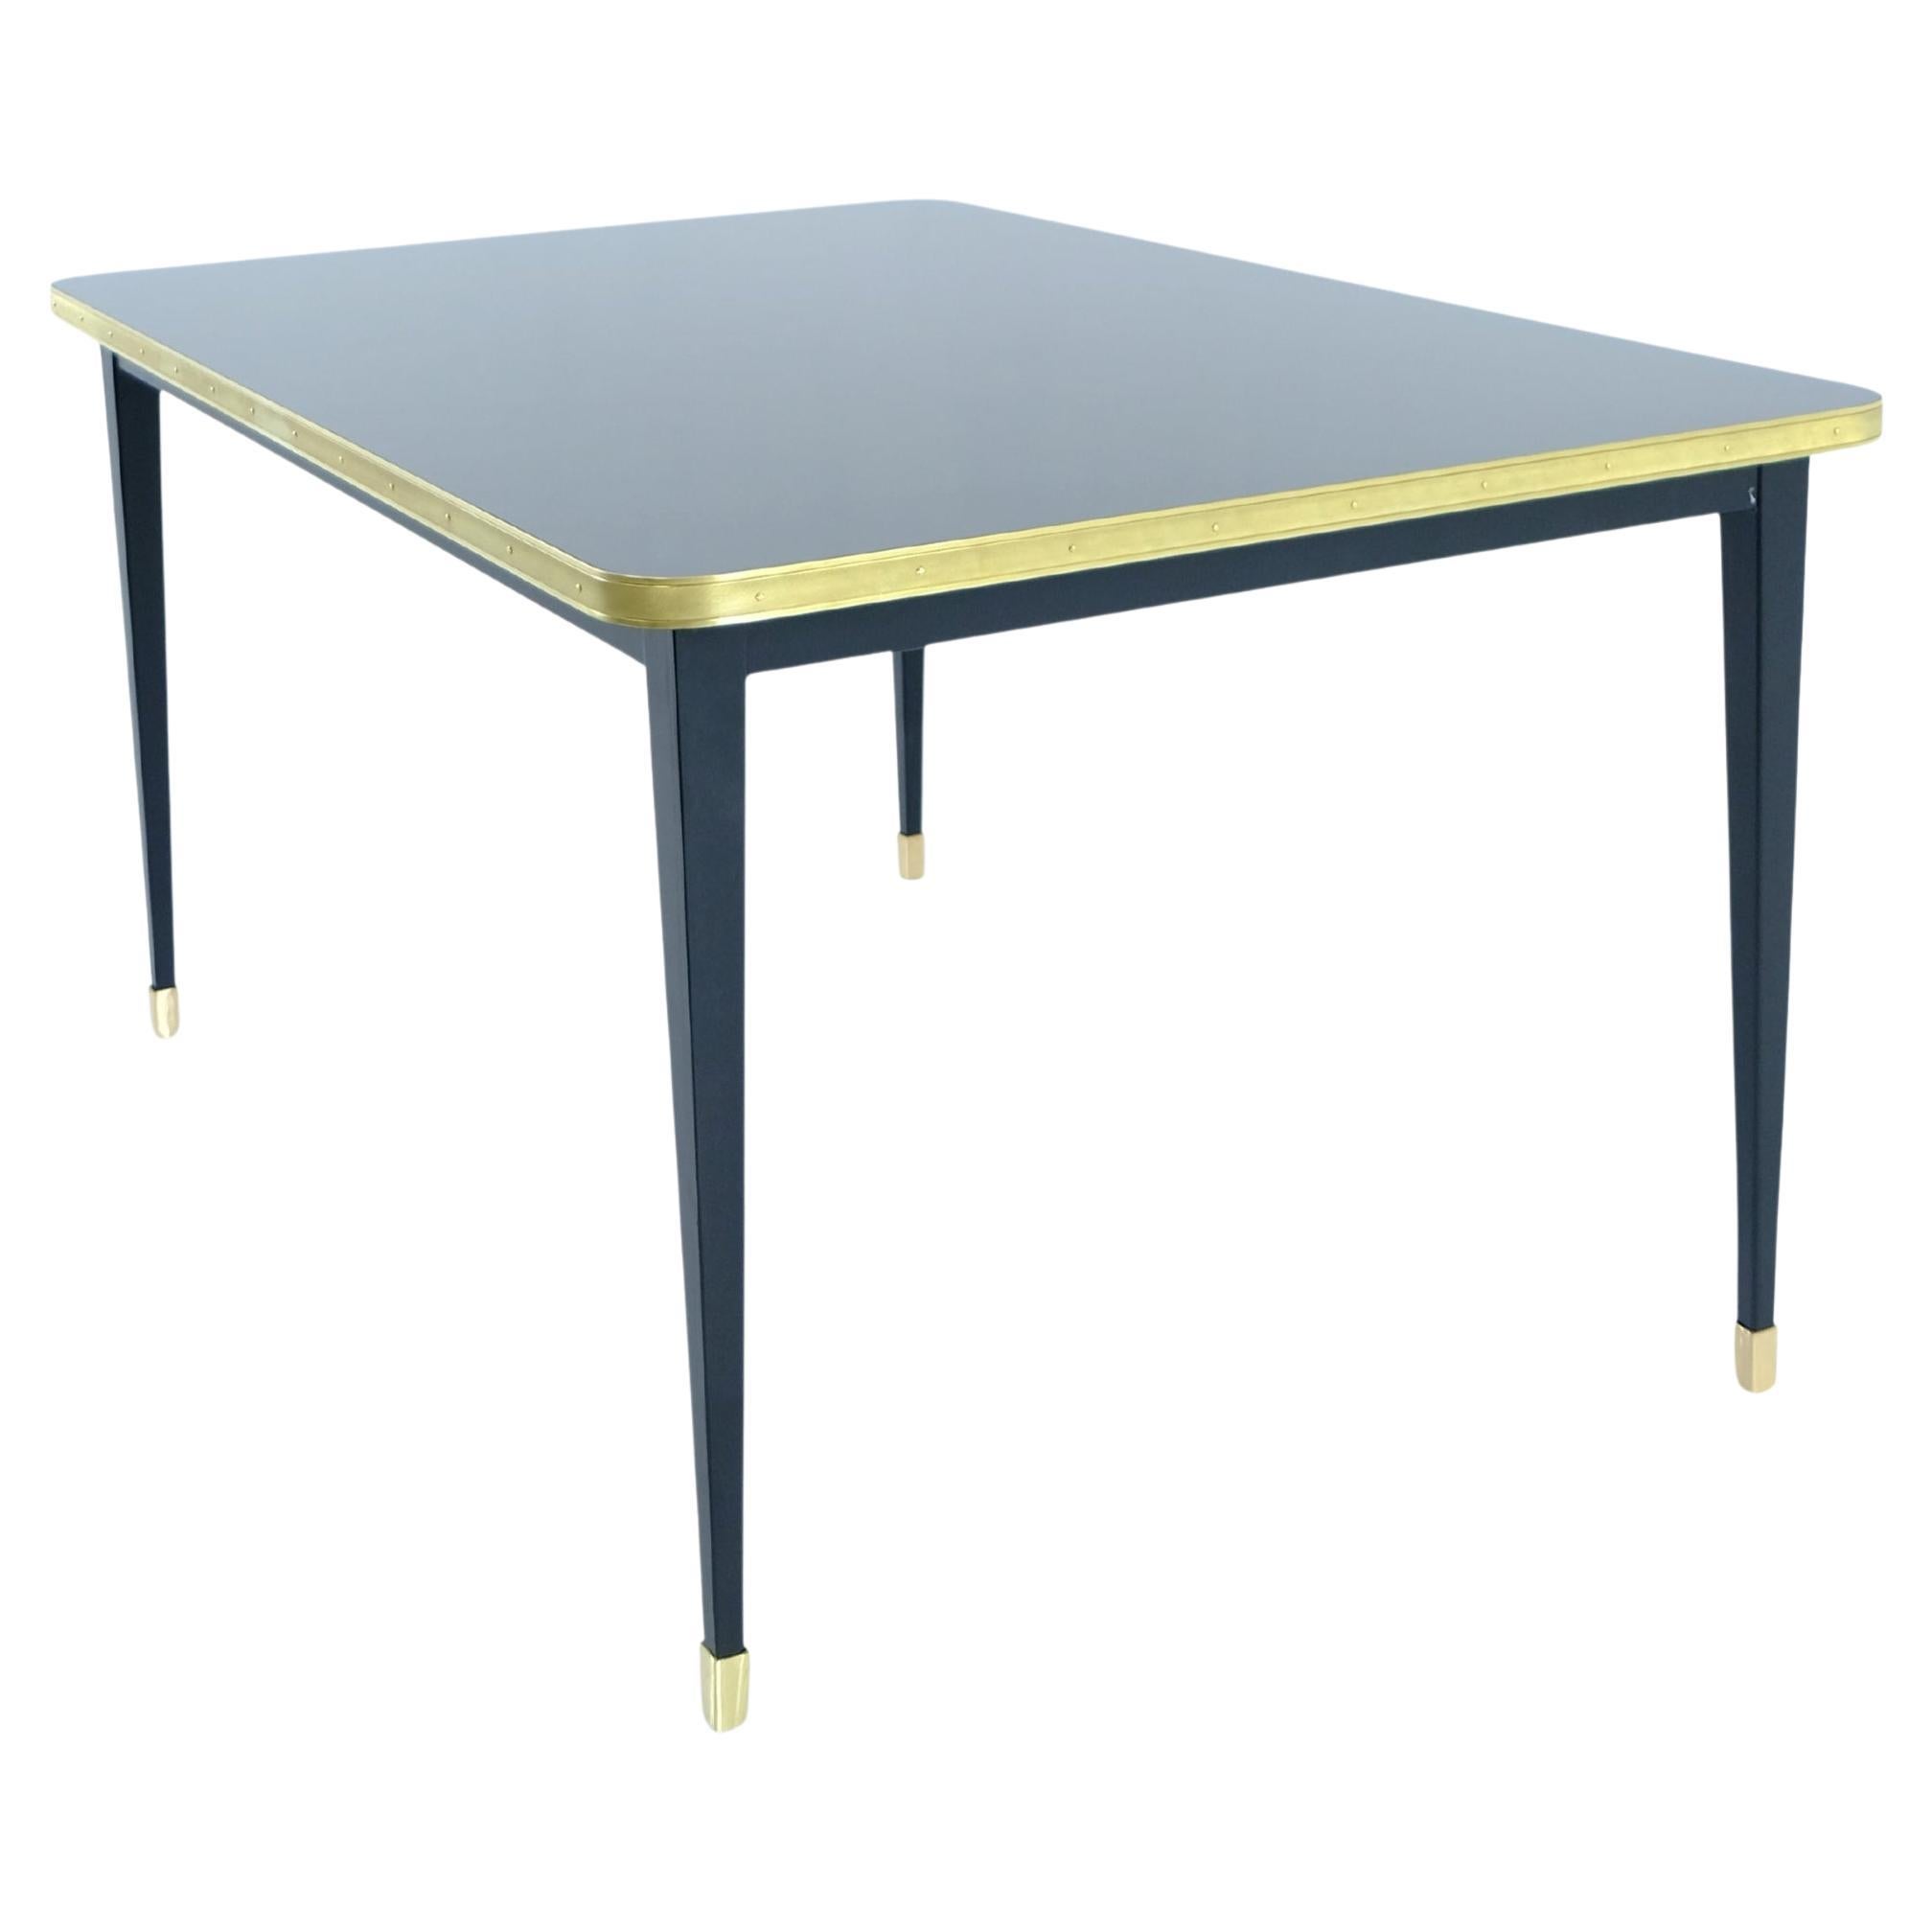 Dinning Table, High Gloss Laminate, Brass, Conic Legs, Navy Night Sea - XL For Sale